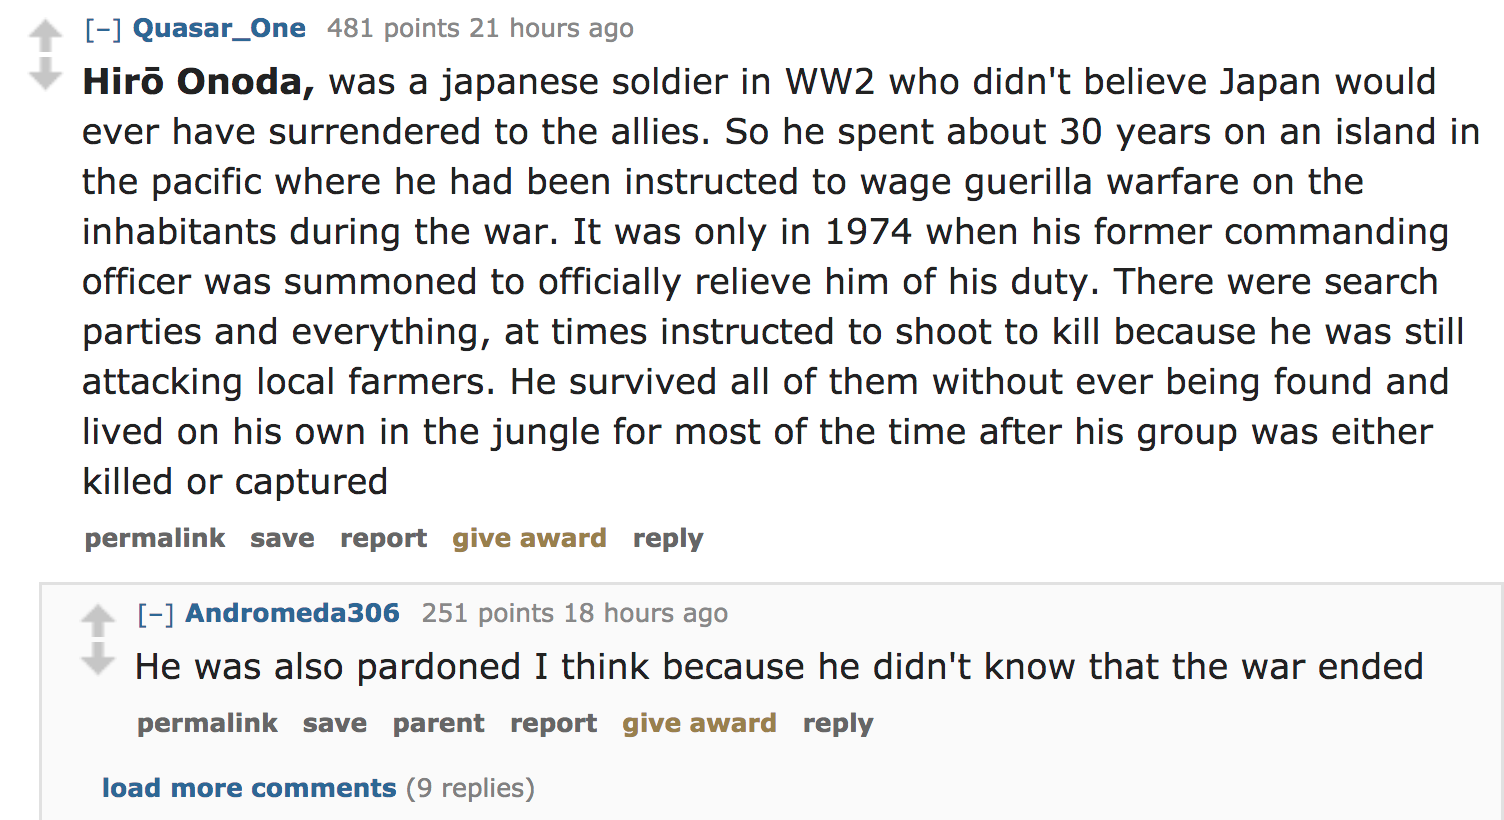 ask reddit - Hiro Onoda, was a japanese soldier in WW2 who didn't believe Japan would ever have surrendered to the allies. So he spent about 30 years on an island in the pacific where he had been instructed to wage guerilla w